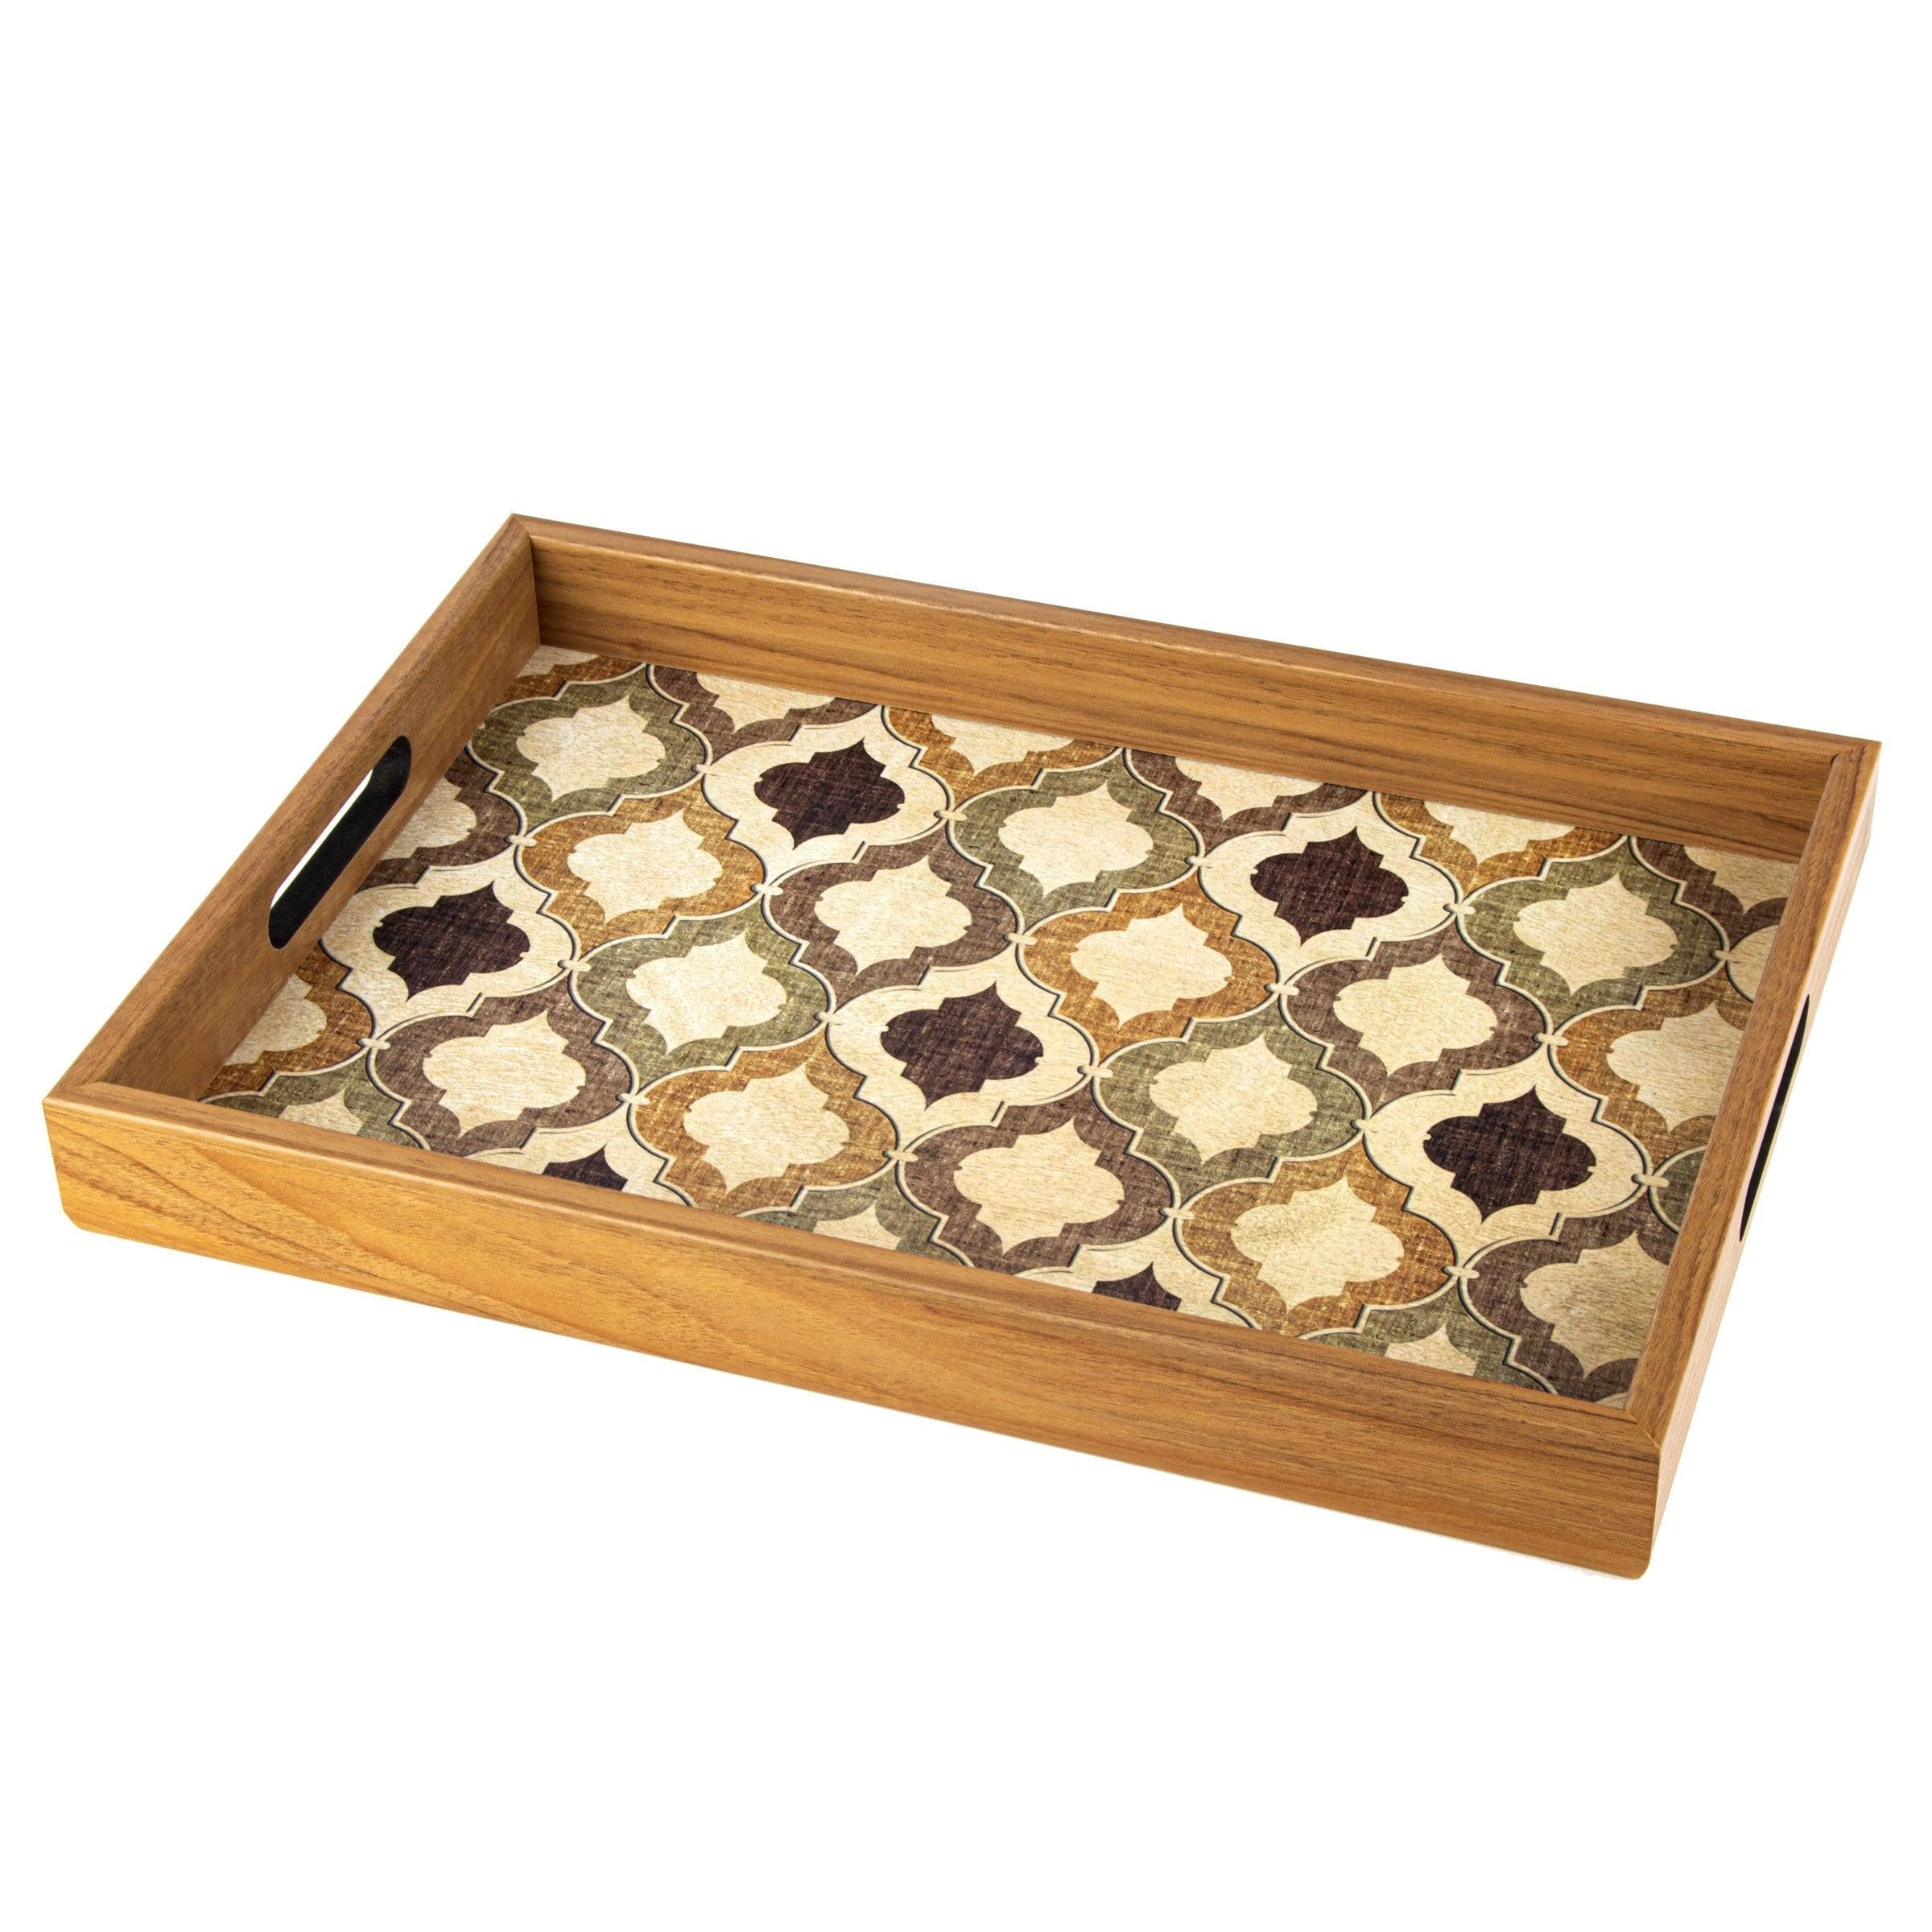 WOODEN TRAY with printed design - MOROCCAN STYLE - LAZADO